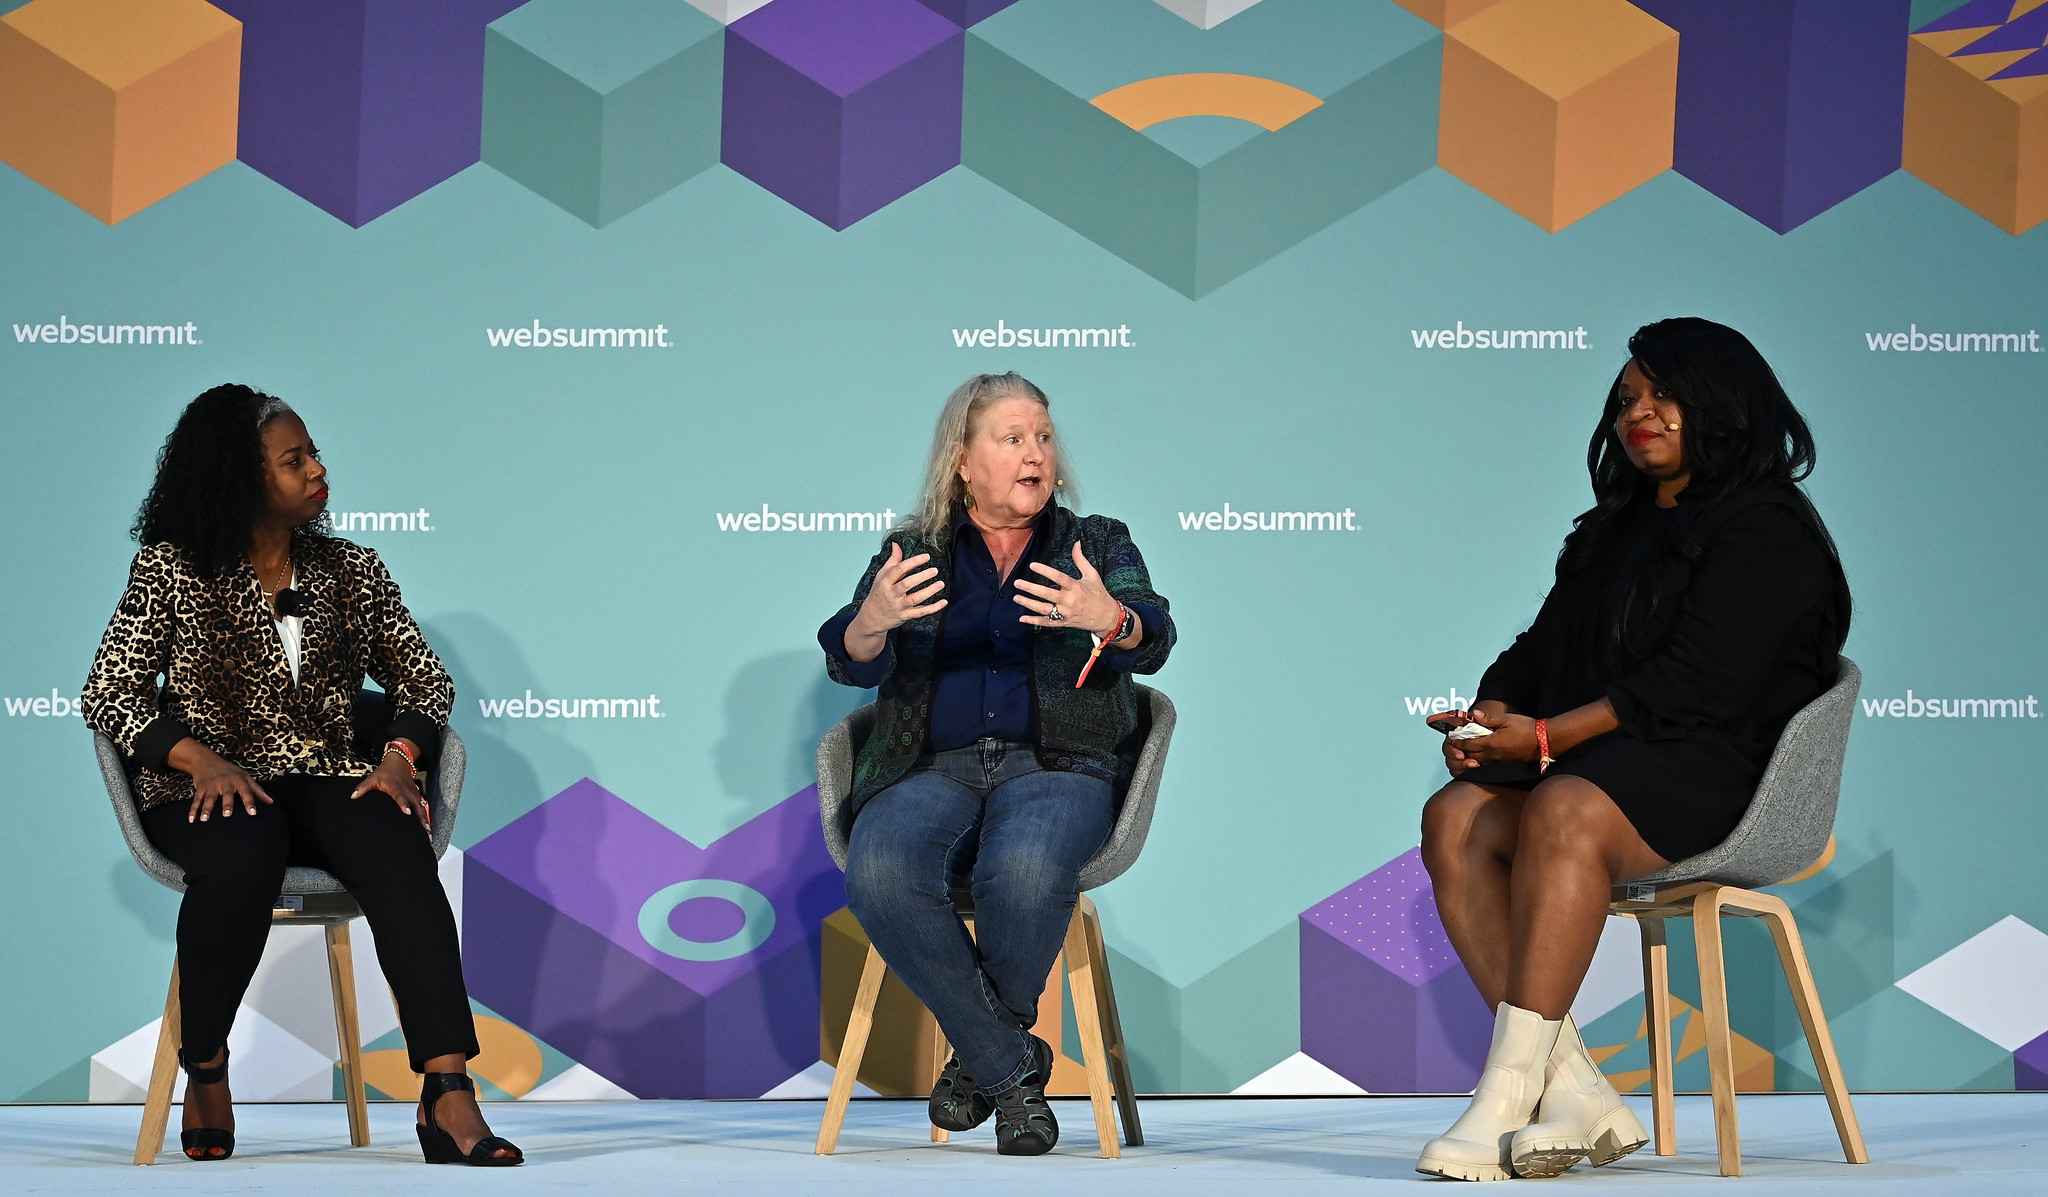 A photograph of three people speaking on stage at Web Summit. They are seated and appear to be having a discussion.